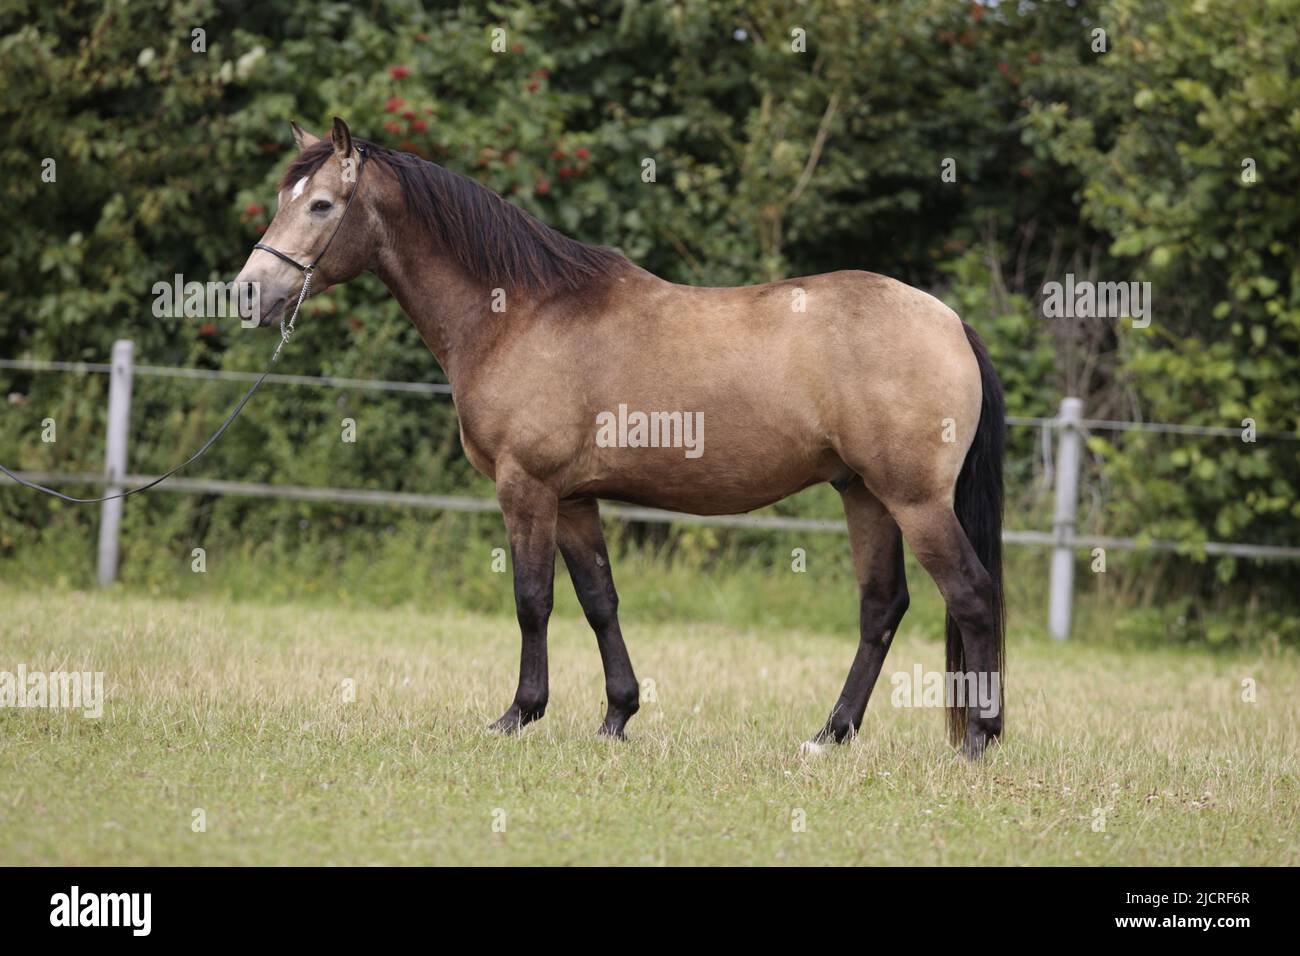 Azteca Horse. Adult standing, seen side-on. Germany Stock Photo